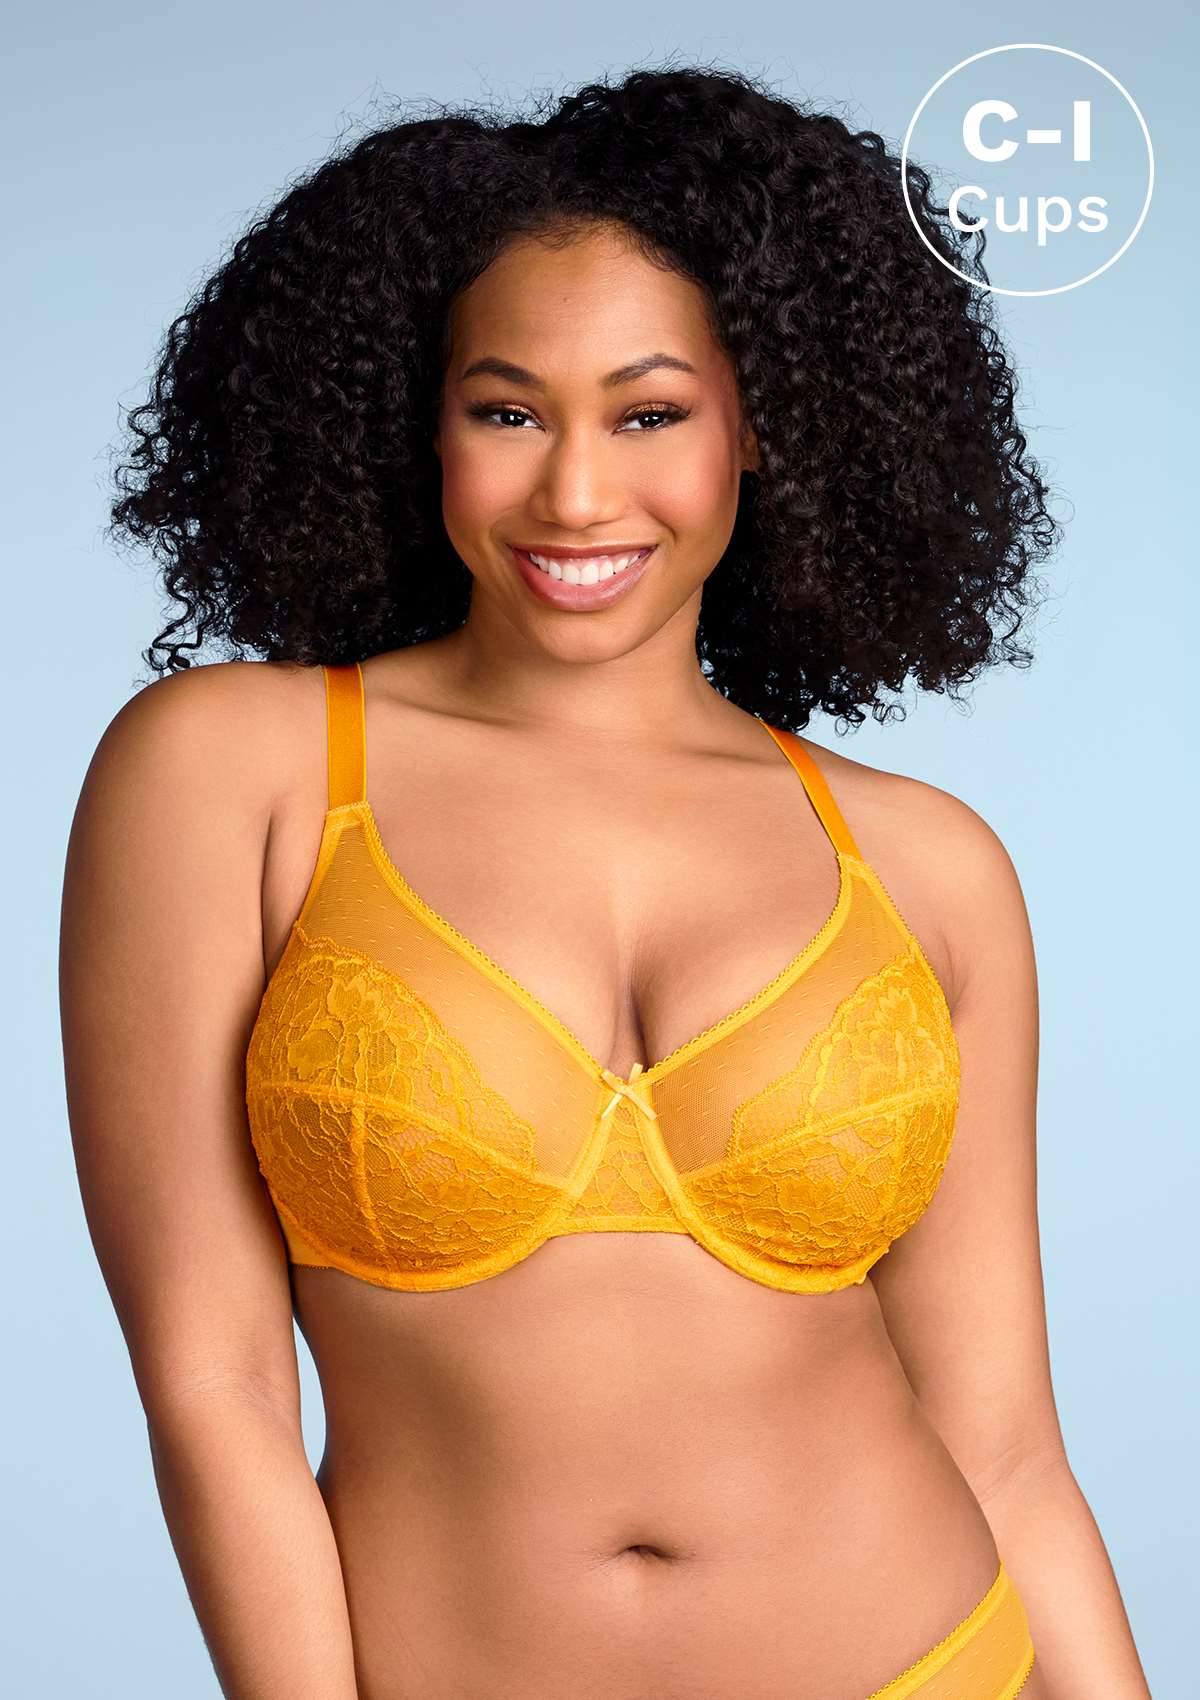 Enchante - Yellow Unlined Underwire Lace Minimizer Bra , HSIA - Cadmium Yellow / 44 / D